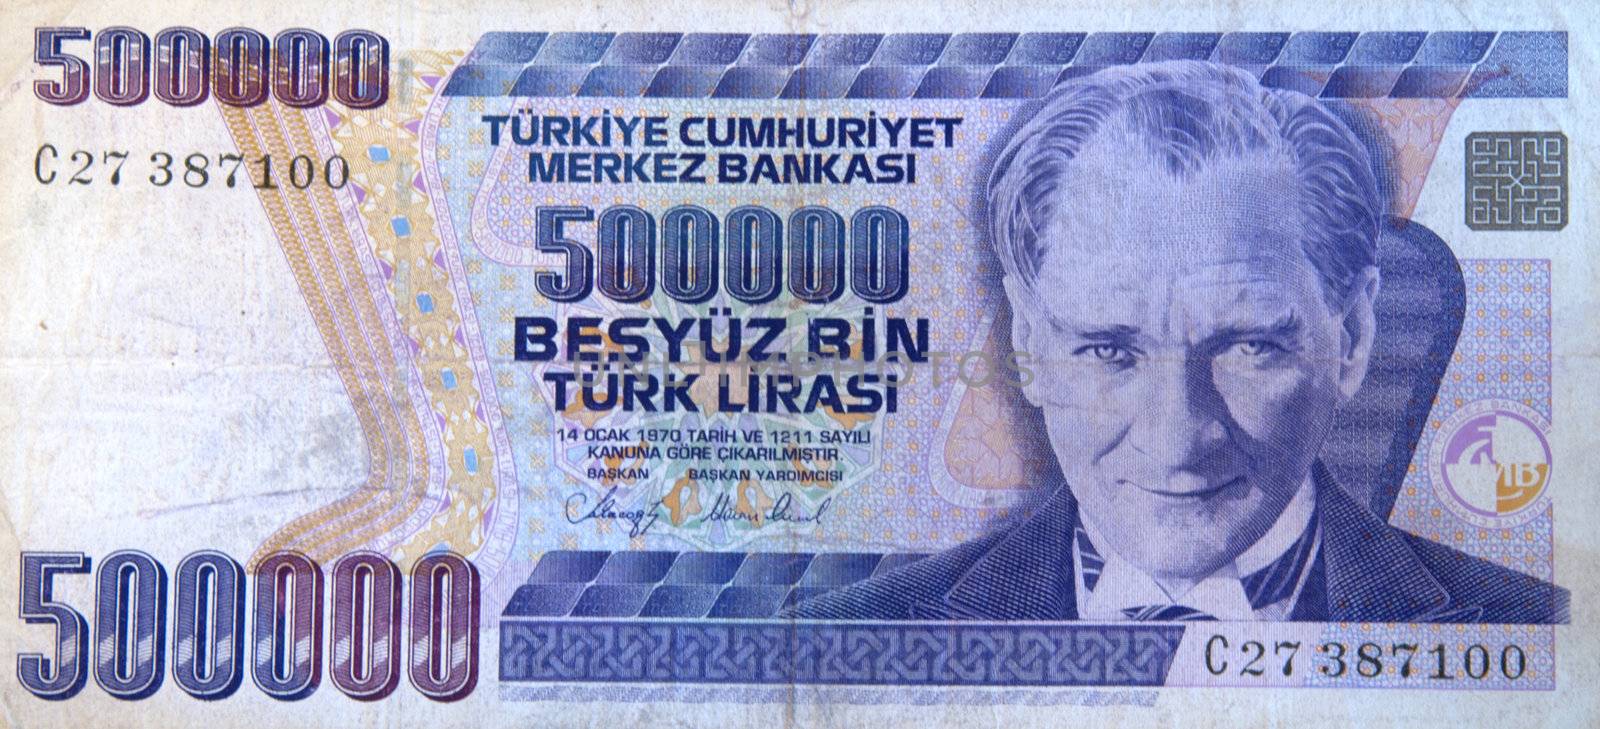 Old Turkish Banknote by d40xboy